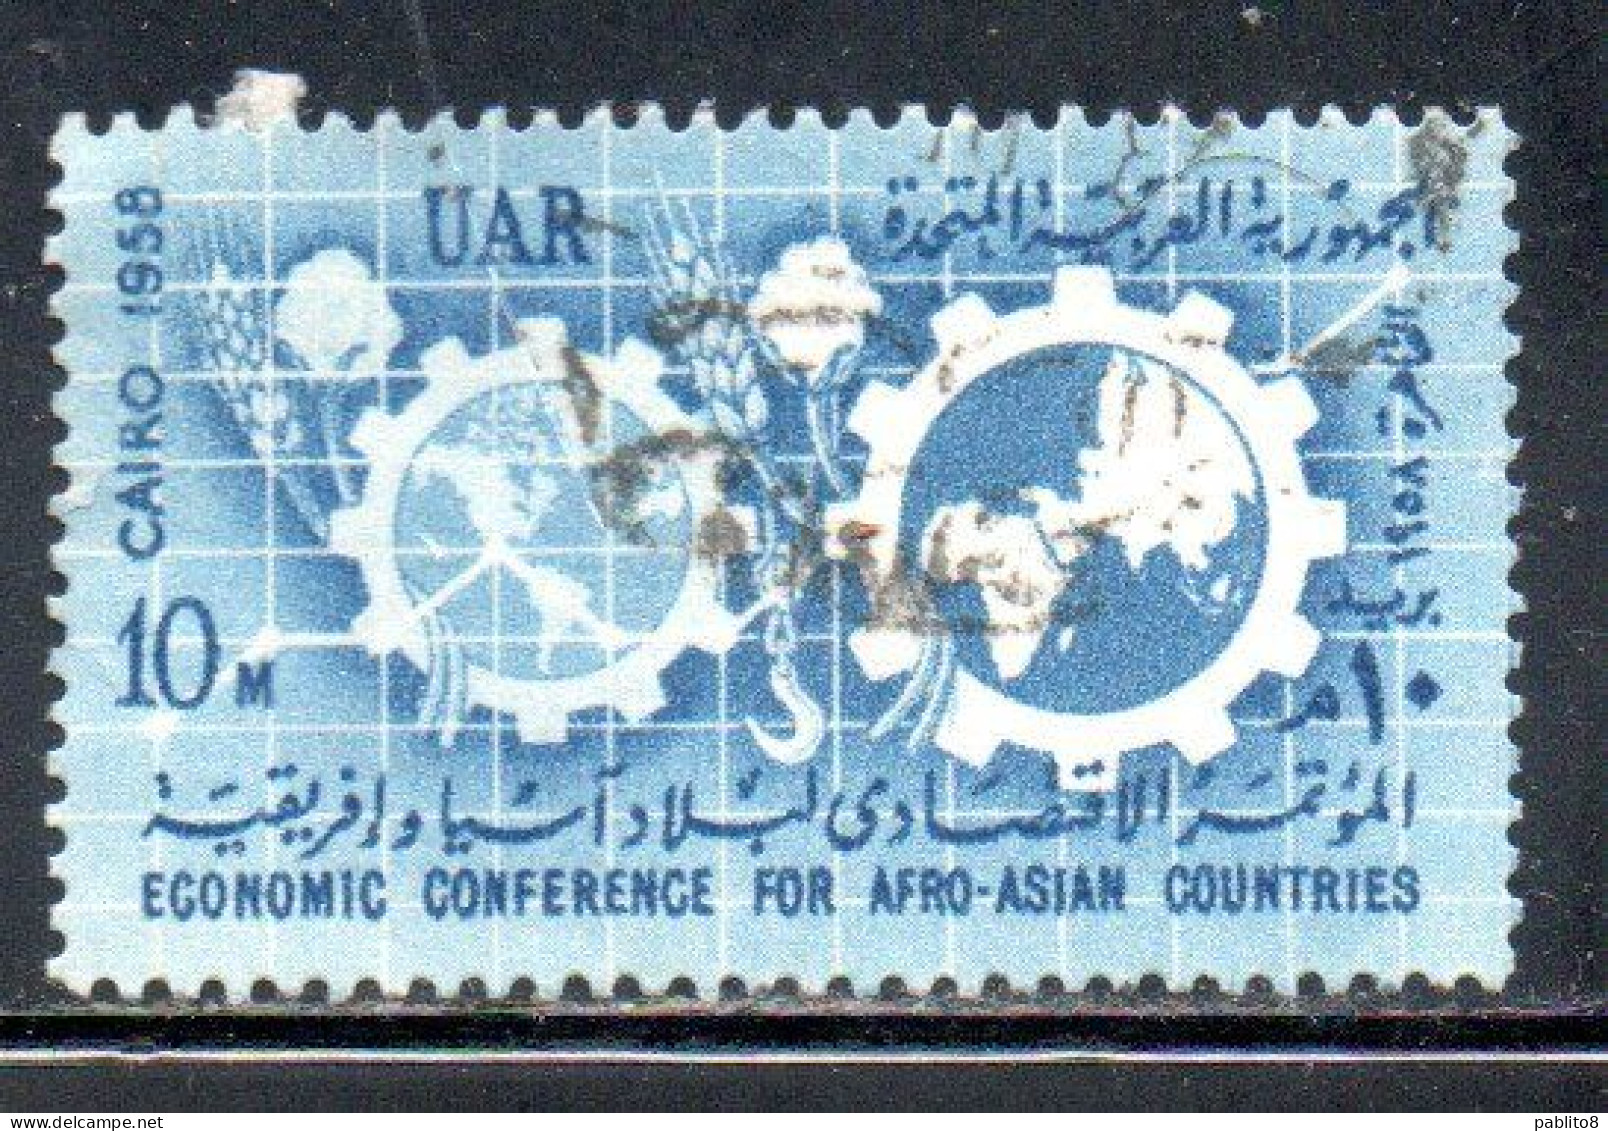 UAR EGYPT EGITTO 1958 ECONOMIC CONFERENCE OF AFRO-ASIAN COUNTRIES CAIROMAPS AND COGWHEELS 10m USED USATO OBLITERE' - Usados